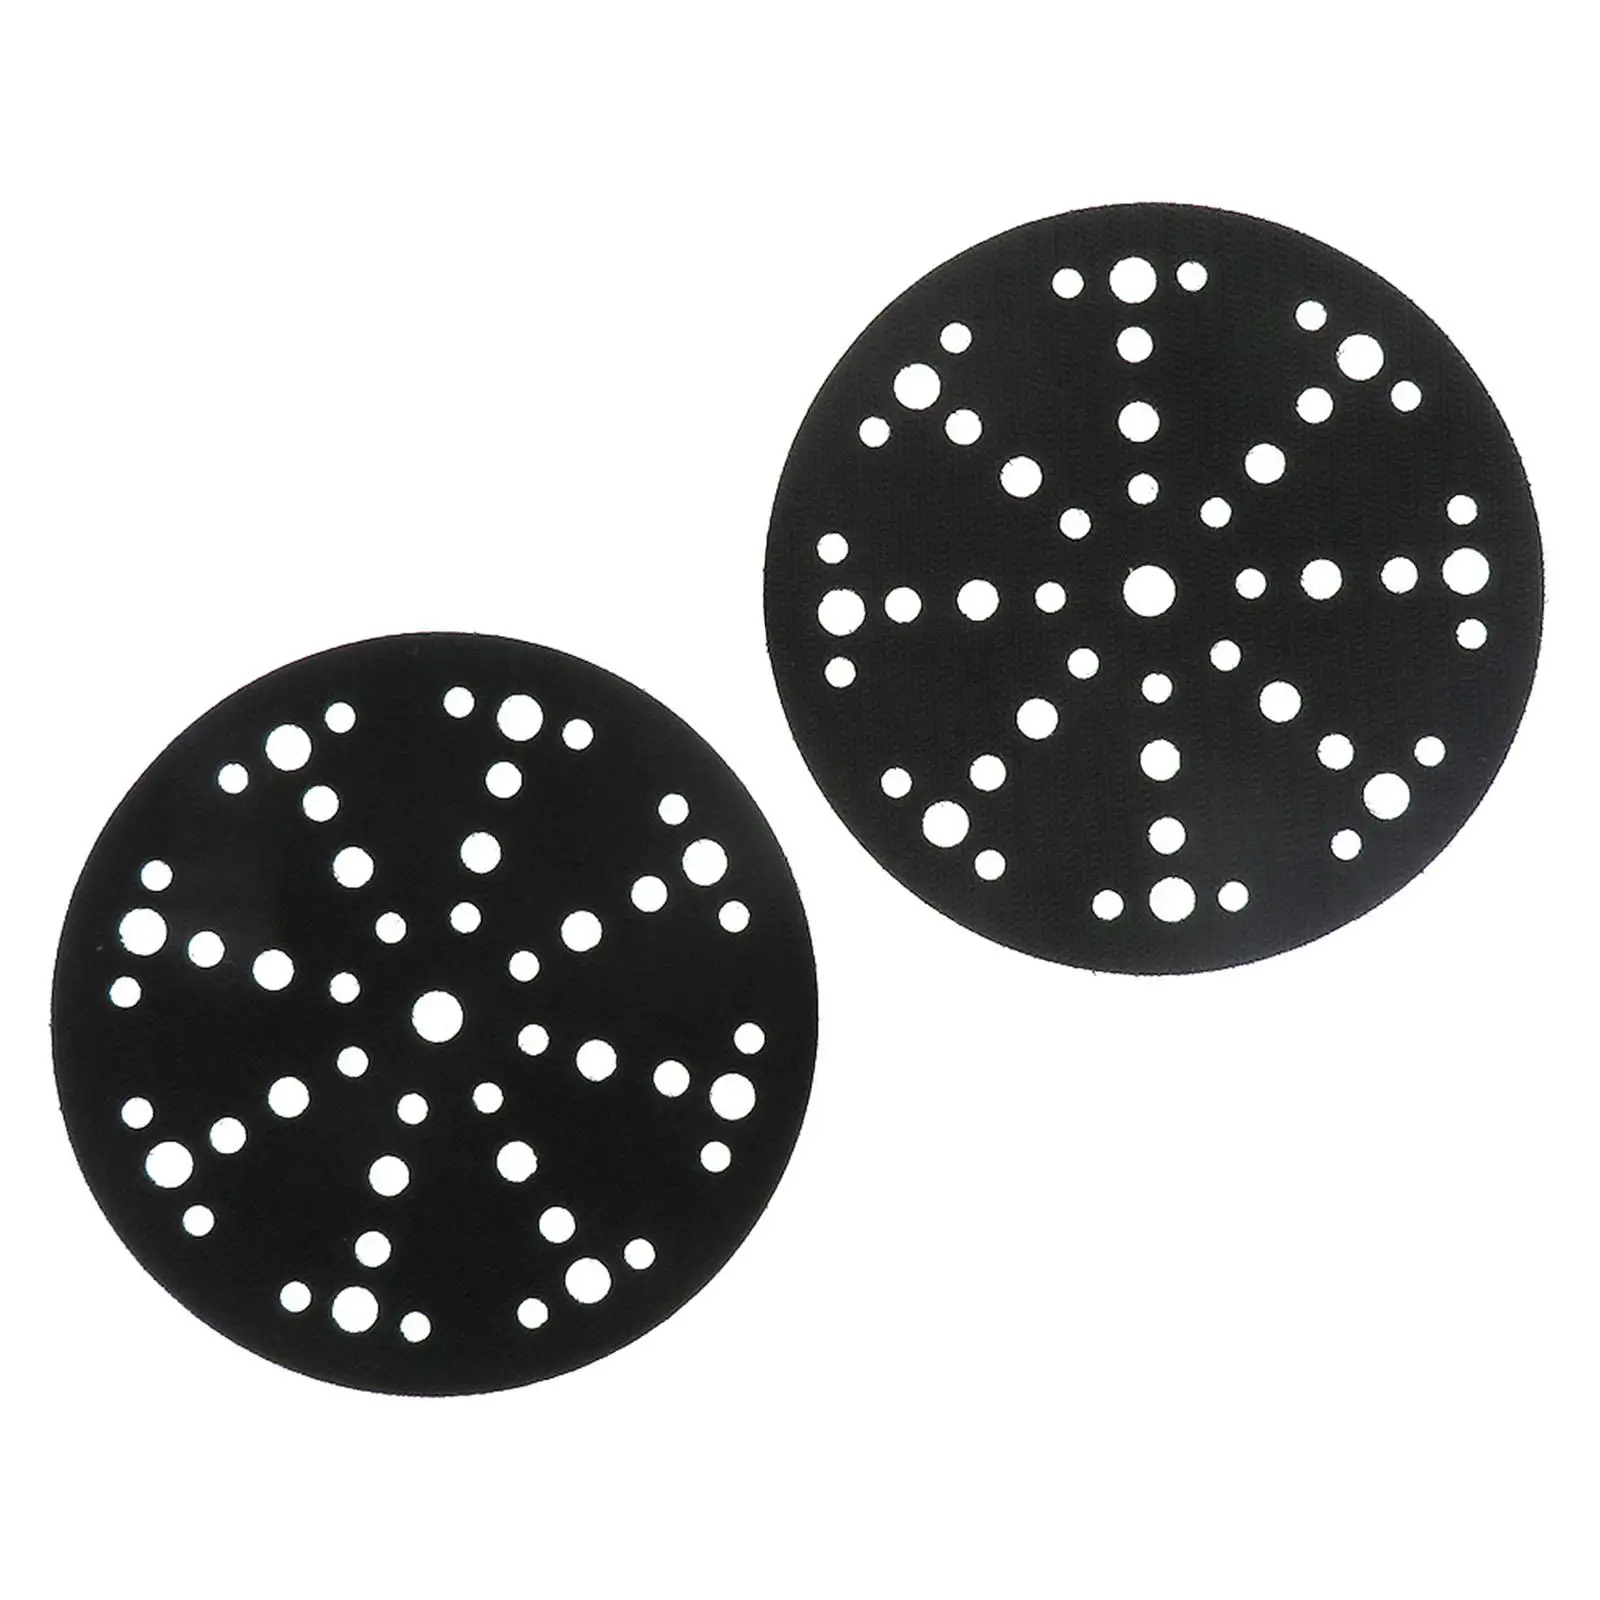 2 Pieces Replace Part Polishing Backing Pads 6in 48 Holes for Woodworking